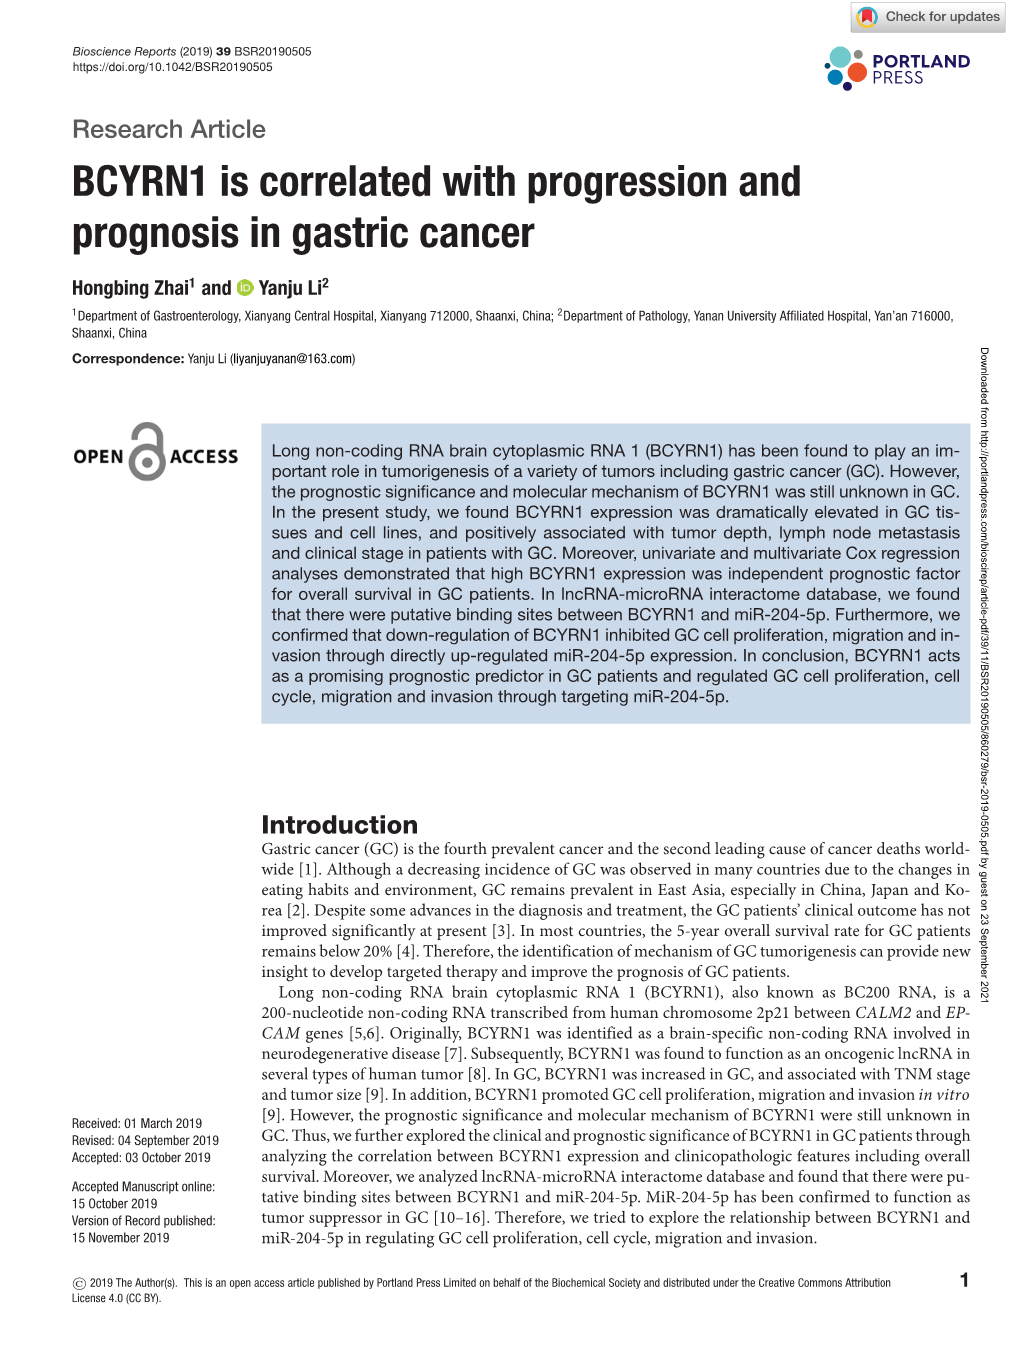 BCYRN1 Is Correlated with Progression and Prognosis in Gastric Cancer